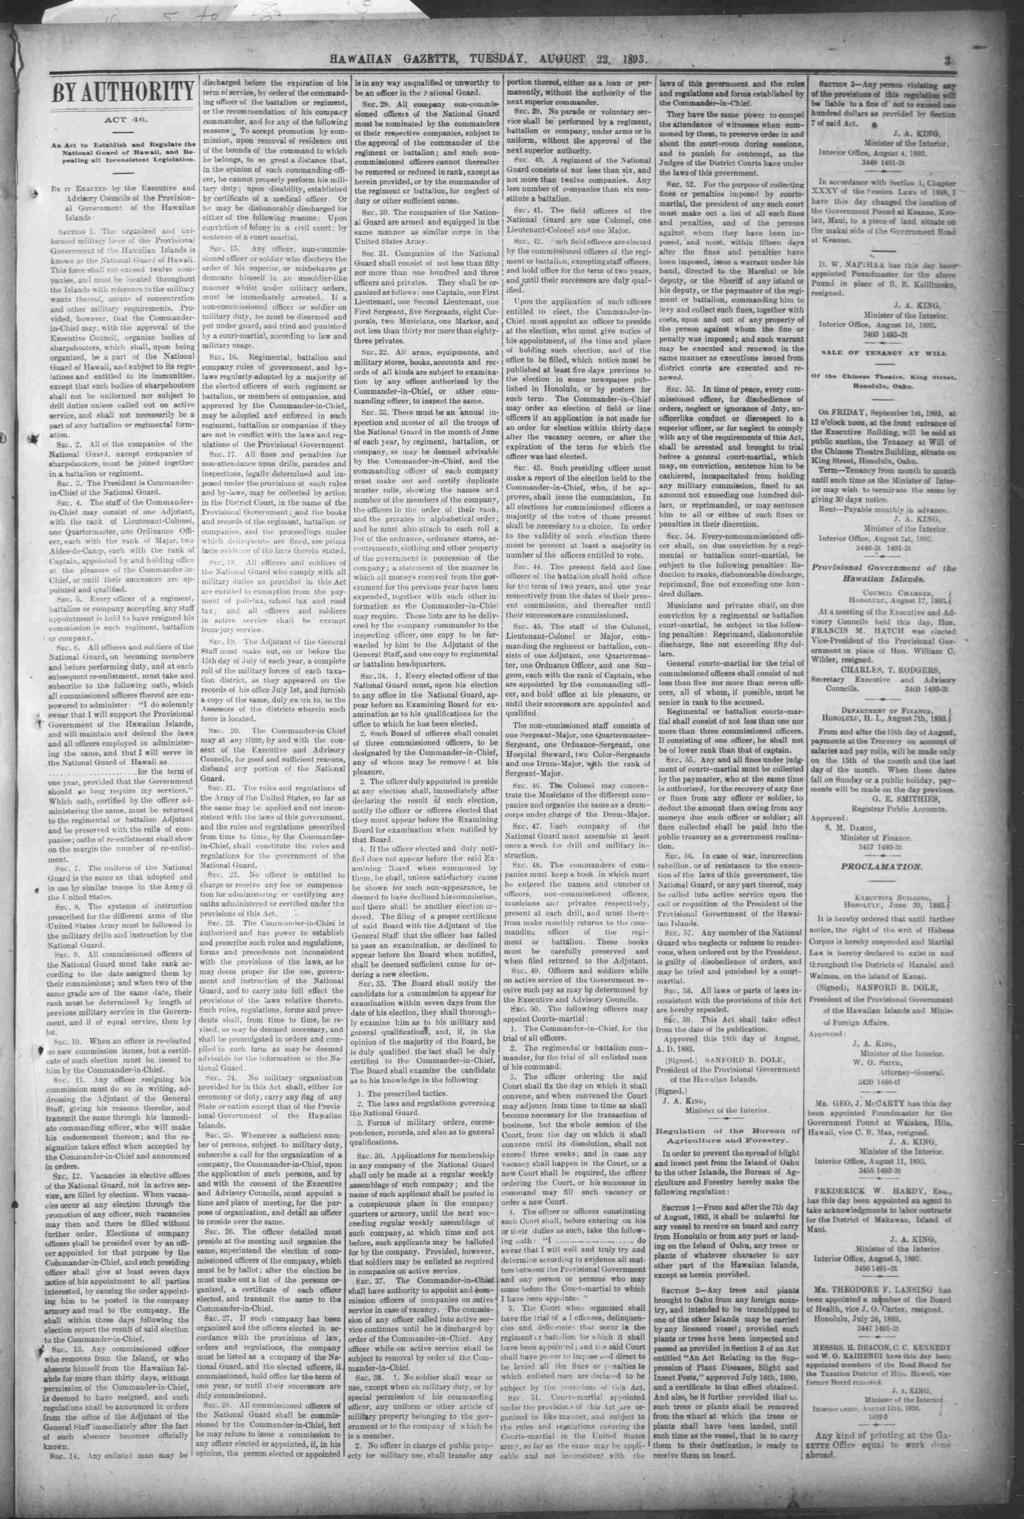 .,... c m pvf T r r rar7r TX fn T"mtT "f5 HMKWaMMSlMSMNSKBSSSSSBBSSSSBSBSHQSBBKDlTOW &&&" rp, "tv - - HAWAAN GAZETTE, TUESDAY, AUGUST 22, 1893. & & BY AUTHORTY ACT 40.